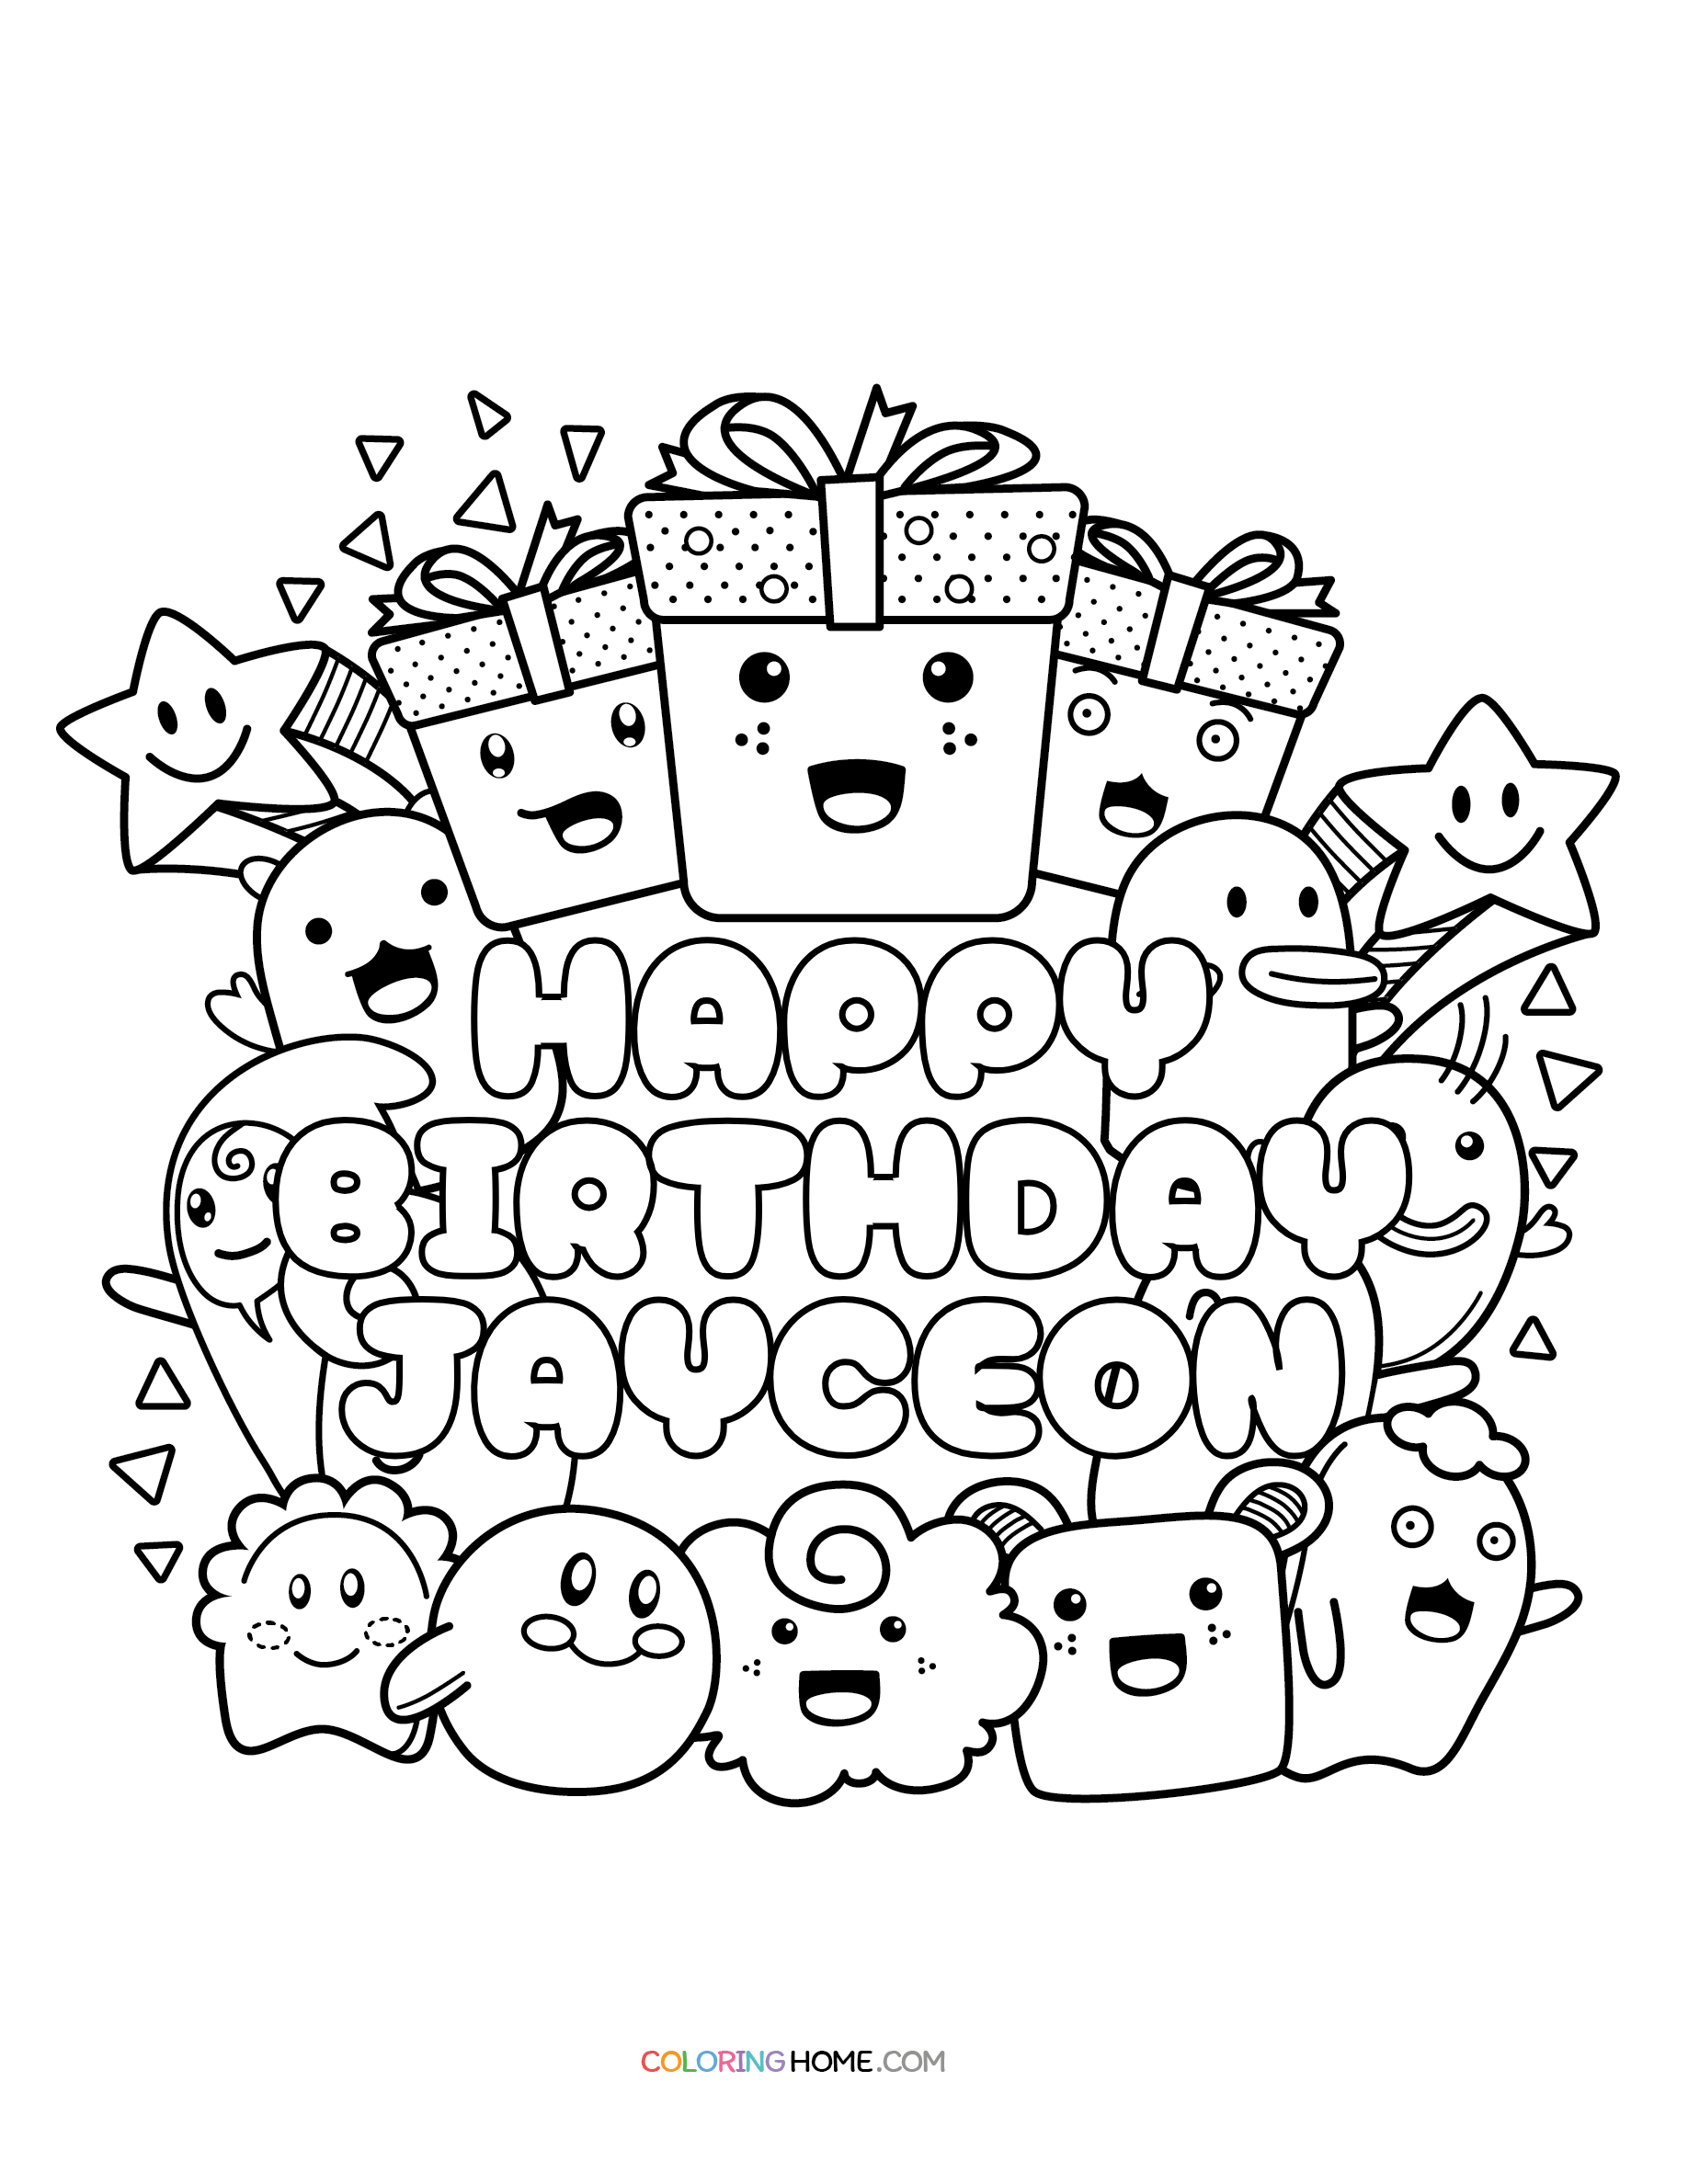 Happy Birthday Jayceon coloring page